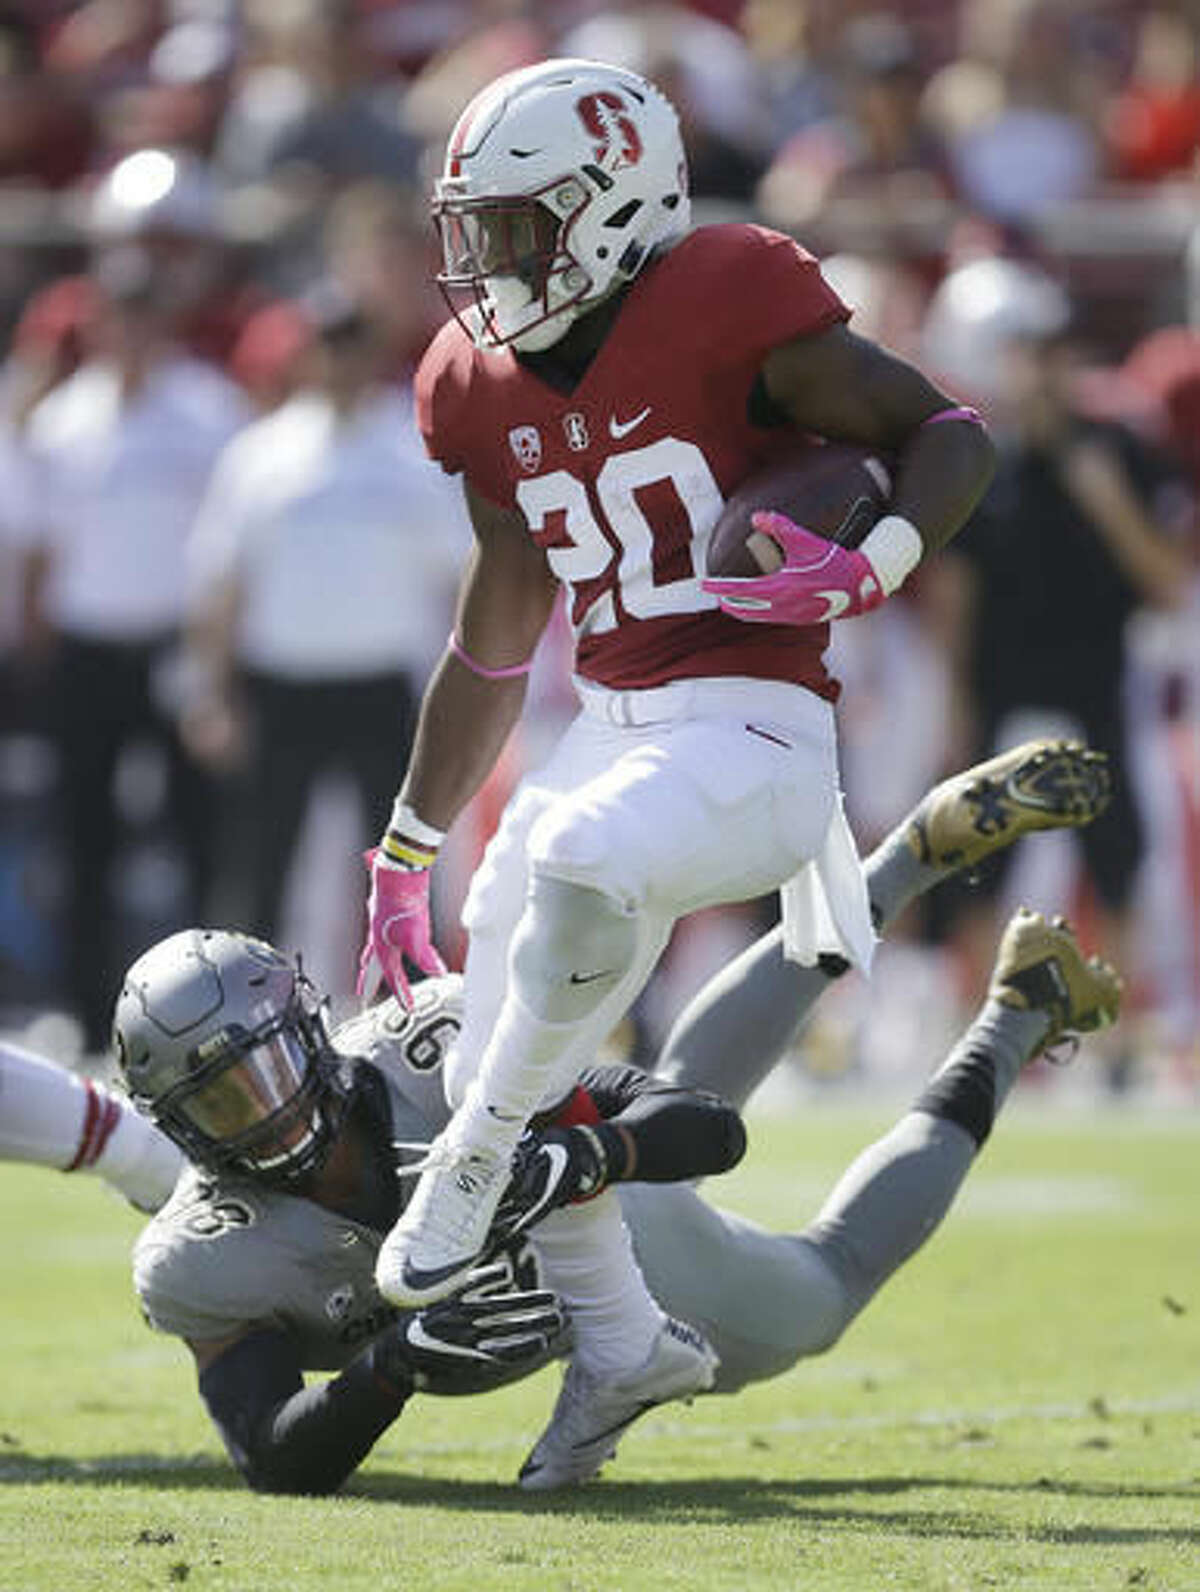 Stanford's Bryce Love, right, breaks the tackle of Colorado's Jimmie Gilbert (98) during the first half of an NCAA college football game, Saturday, Oct. 22, 2016, in Stanford, Calif. (AP Photo/Ben Margot)